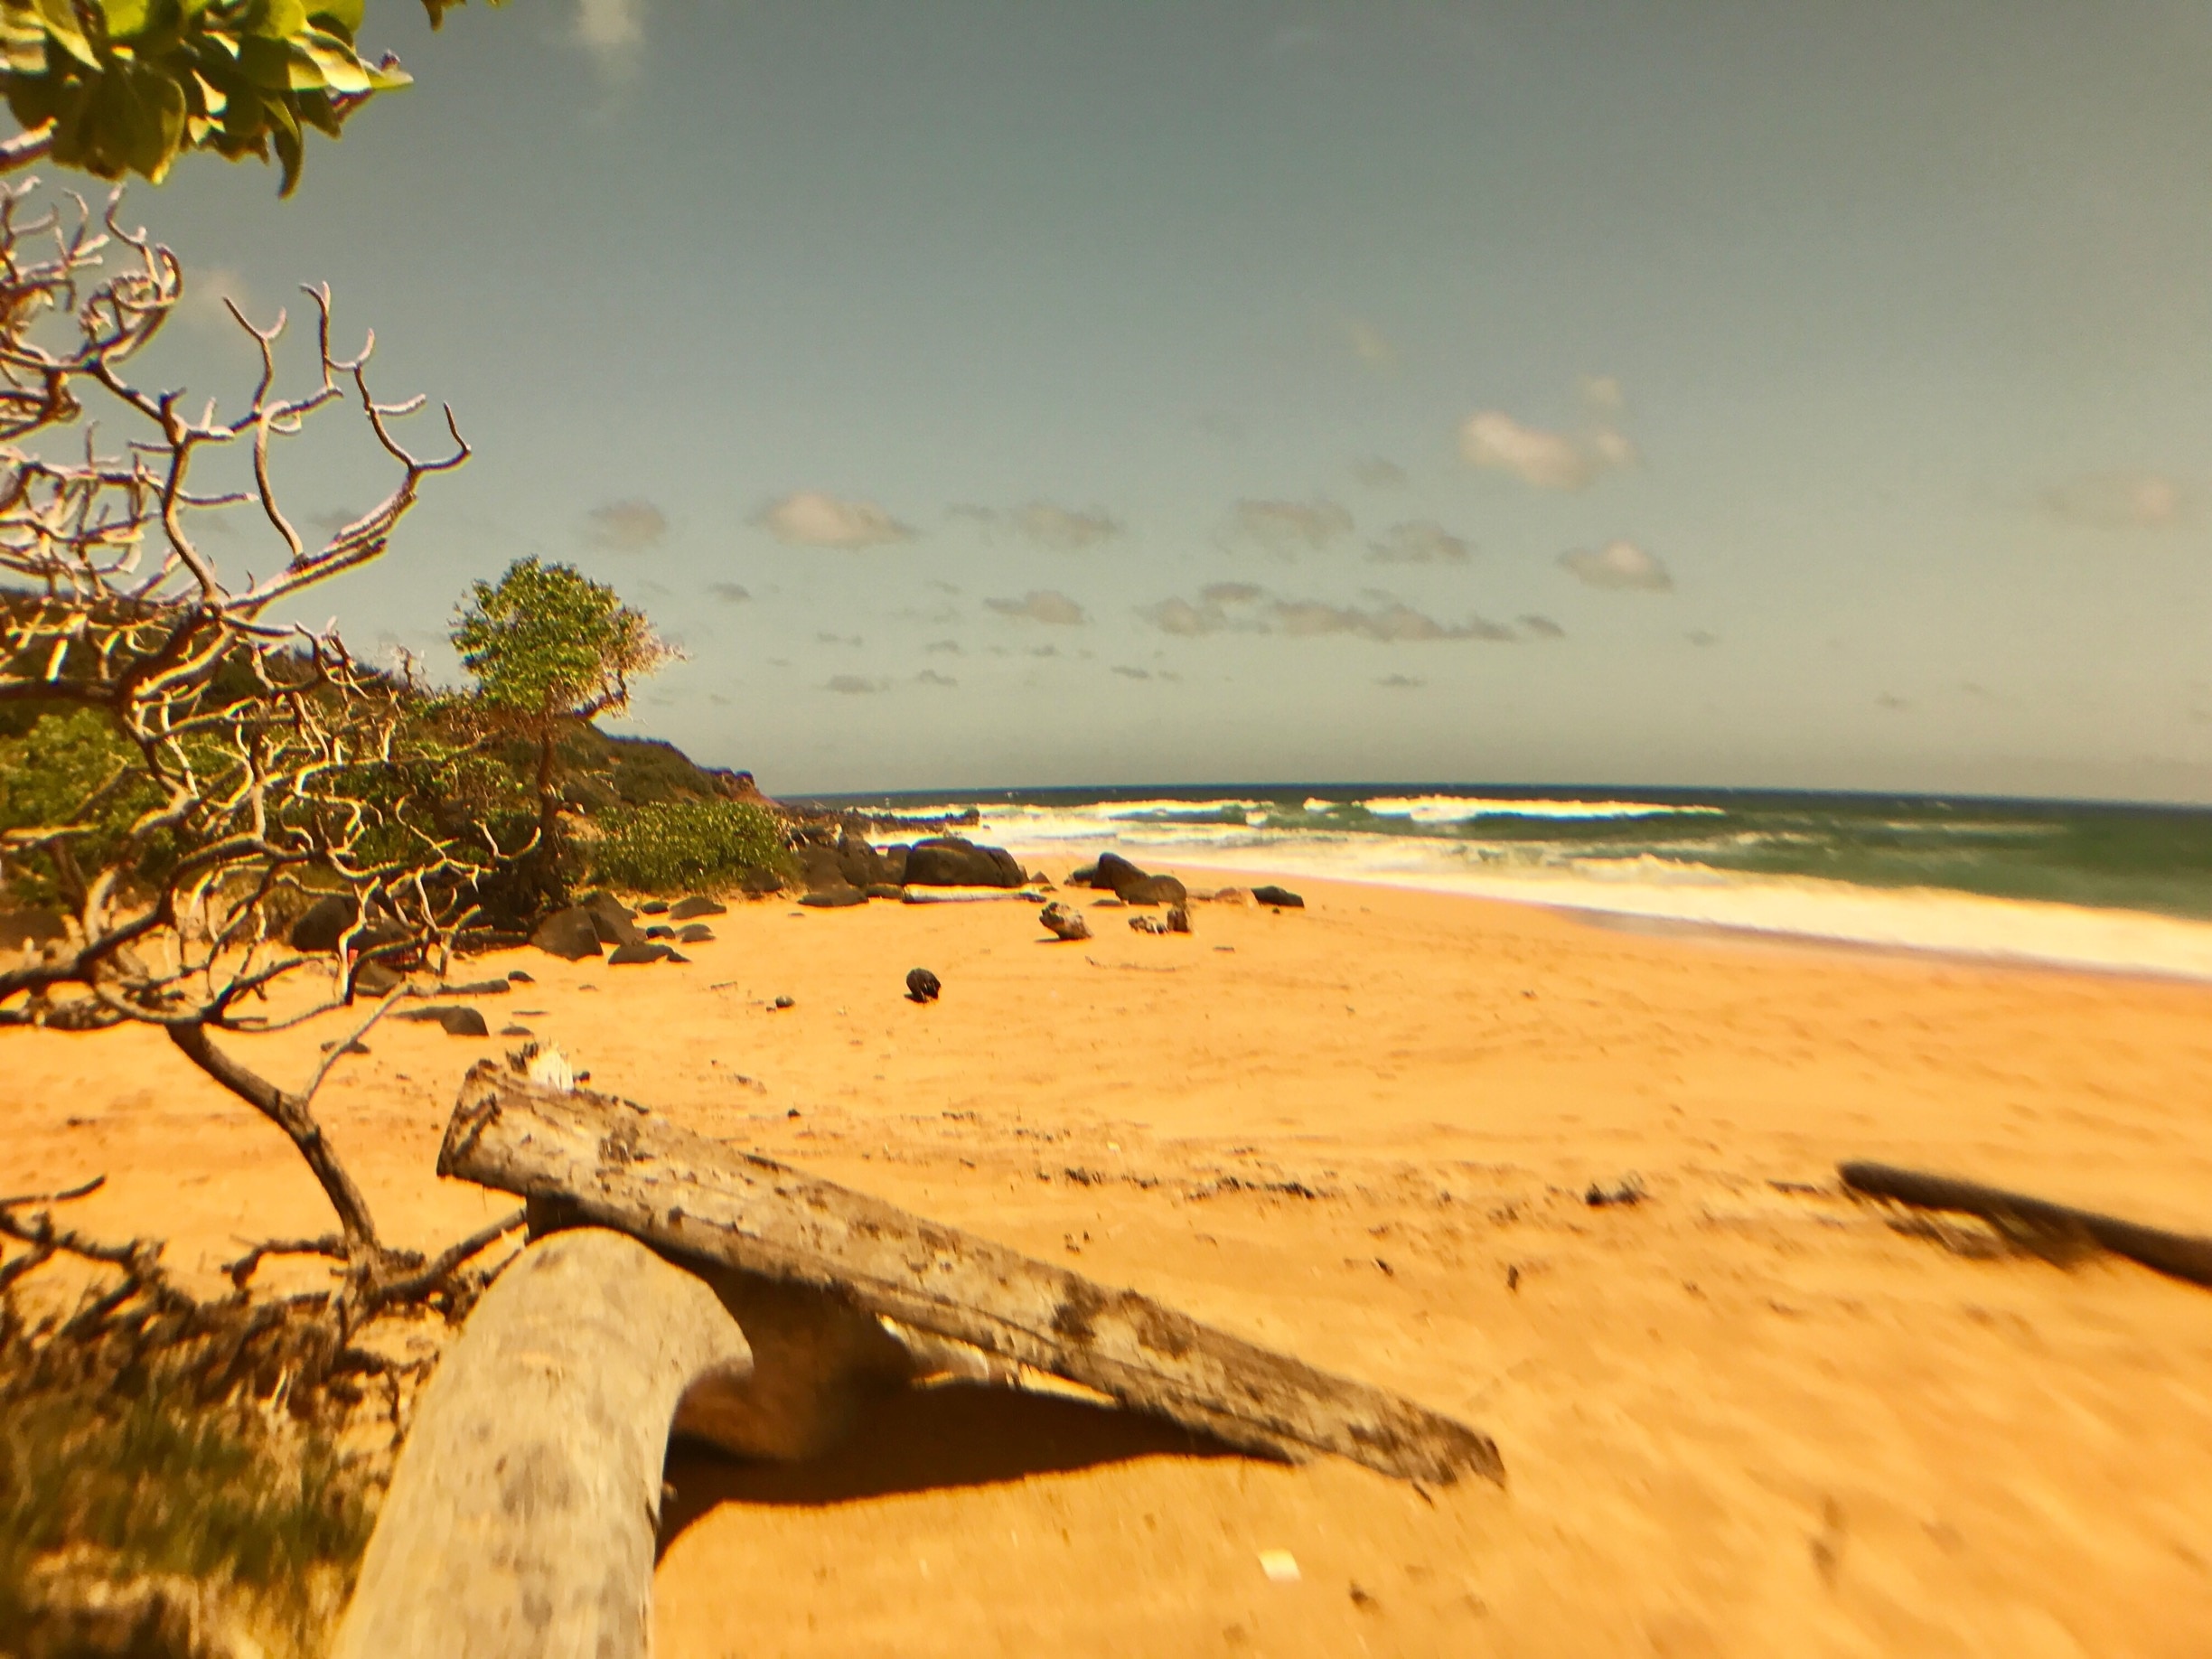 A lovely almost deserted beach north of Kapa'a Kauai
Once famous for nude sun bathing!